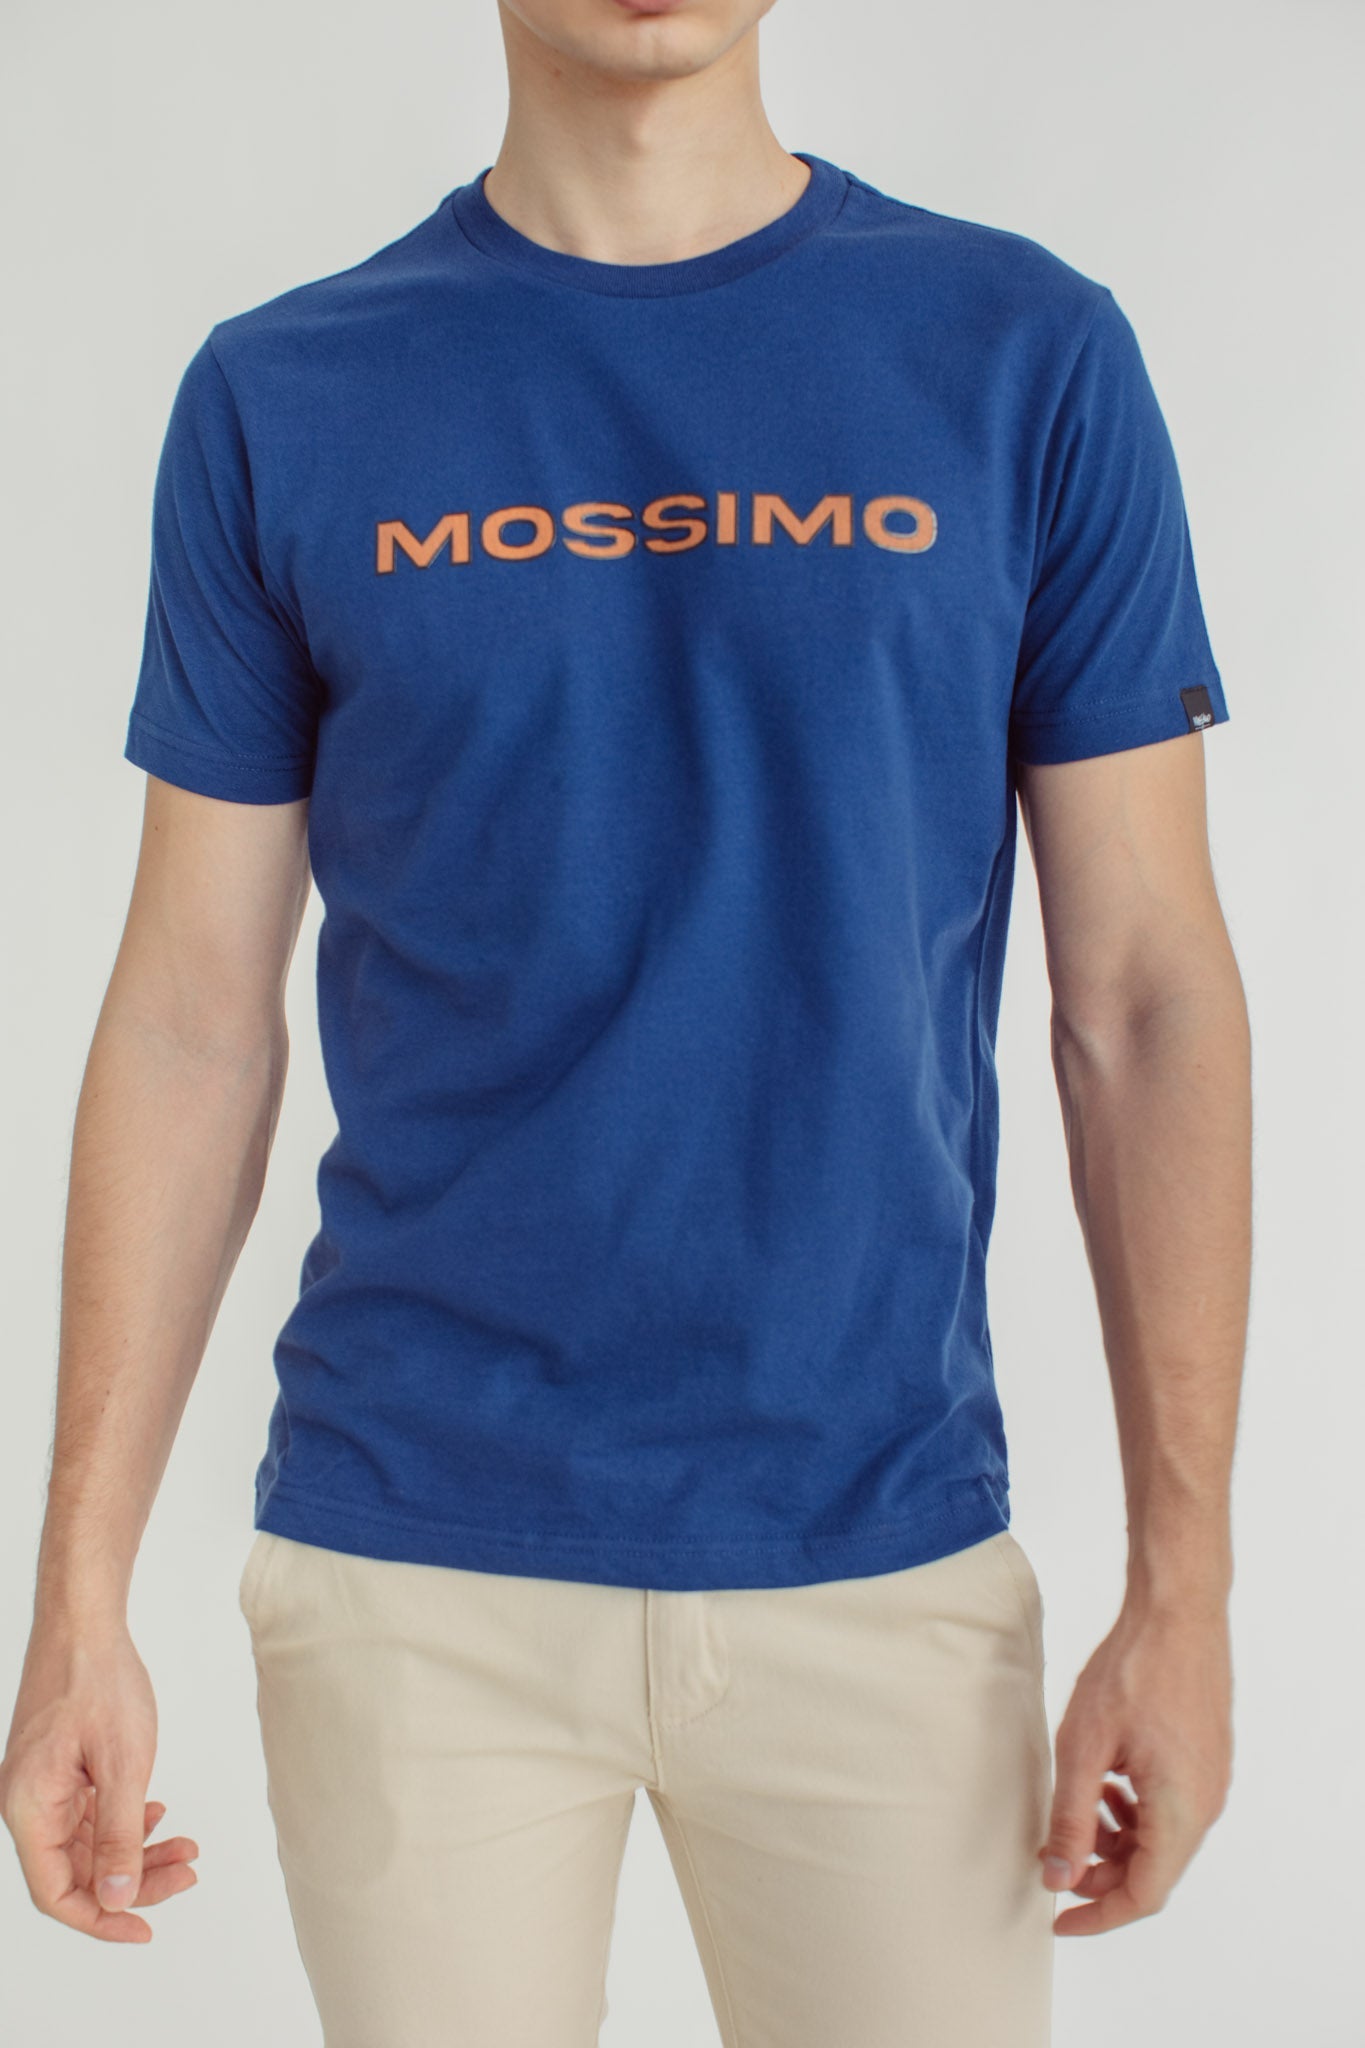 Basic Round Neck with Heat Transfer Applique Muscle Fit Tee - Mossimo PH